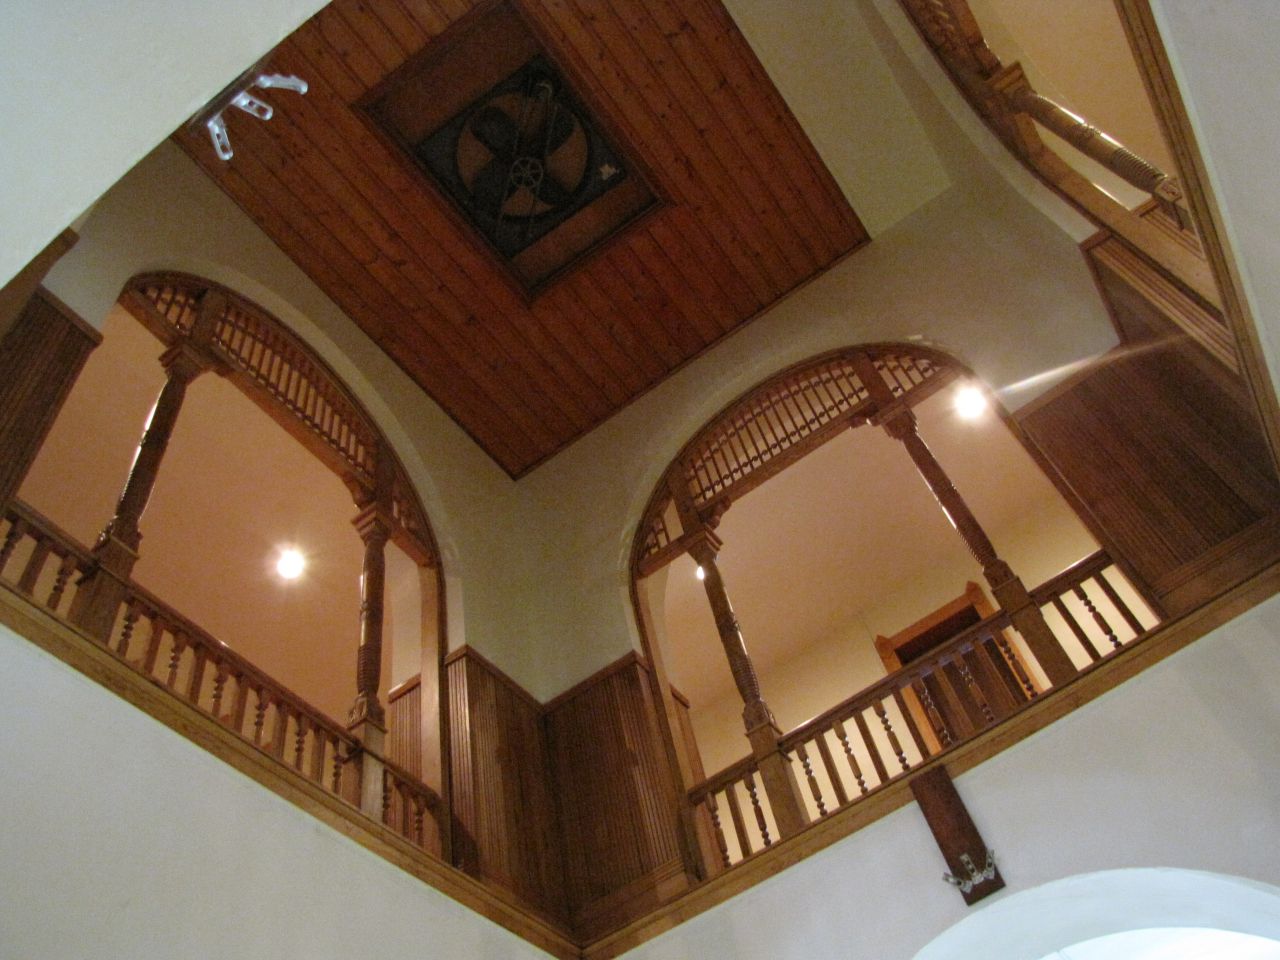 Looking up at the 2nd floor